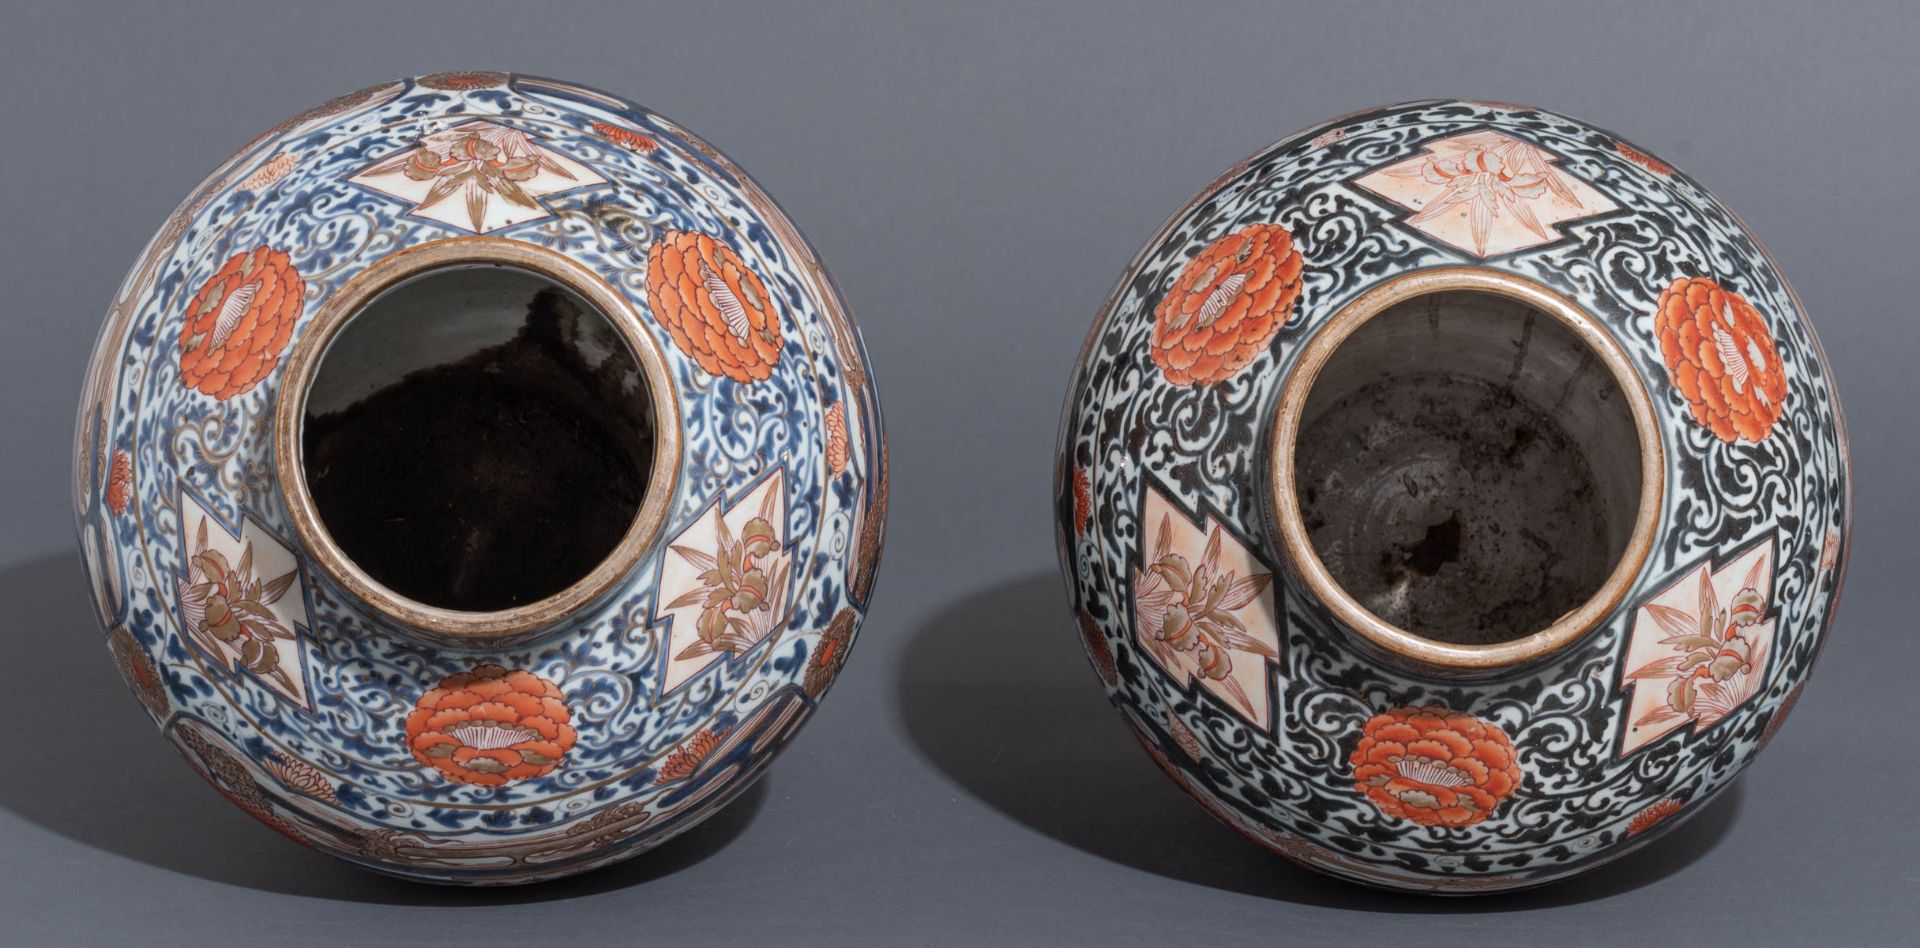 A pair of Japanese Imari covered vases - Image 7 of 8